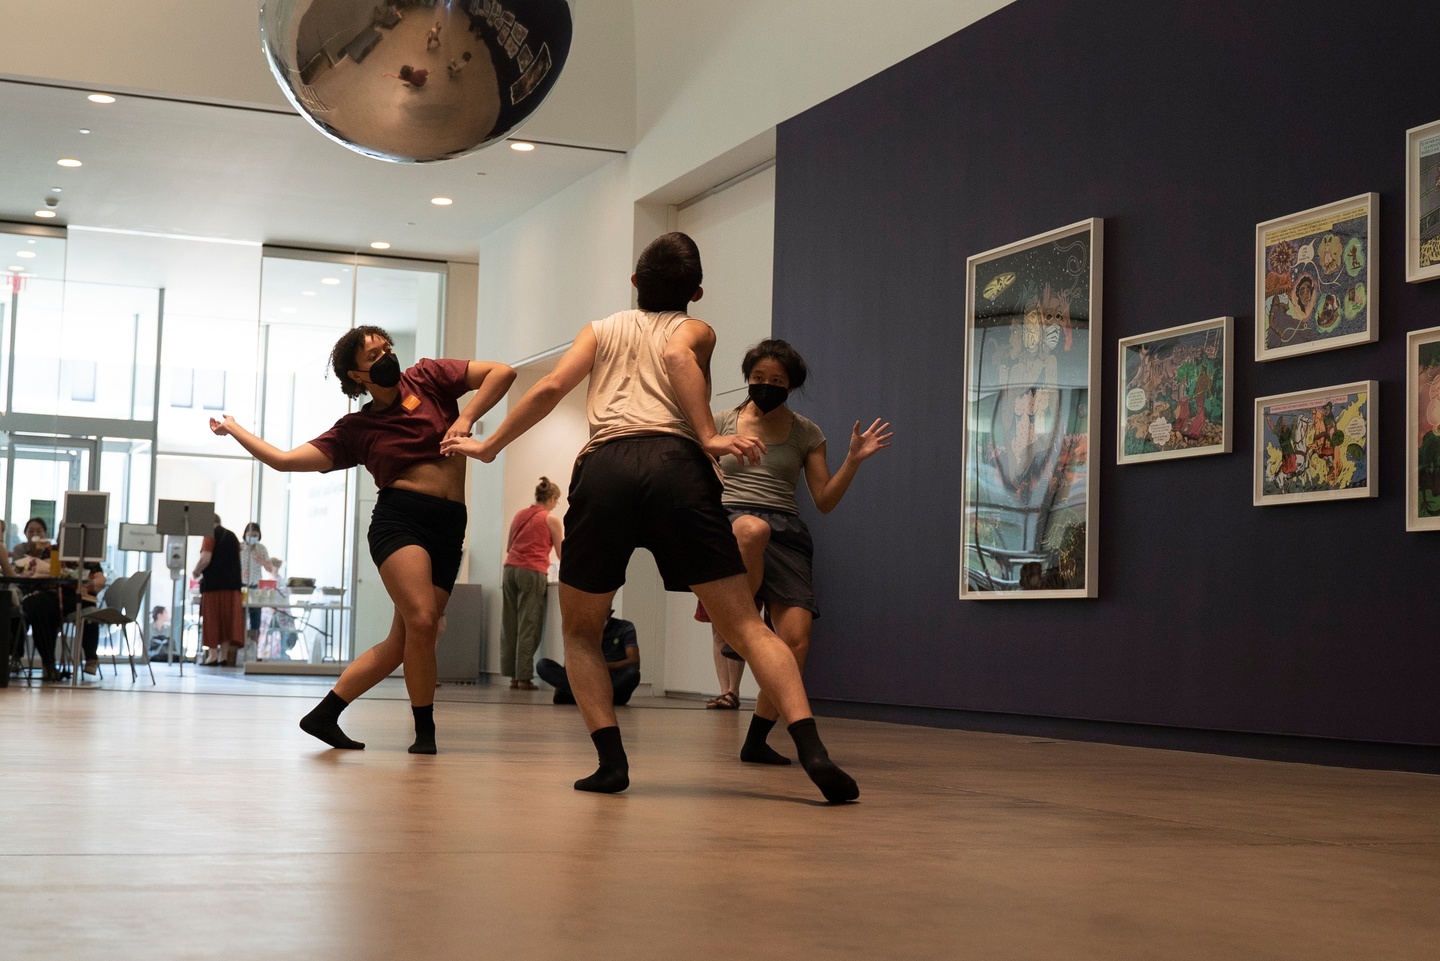 Three people dancing in a museum space